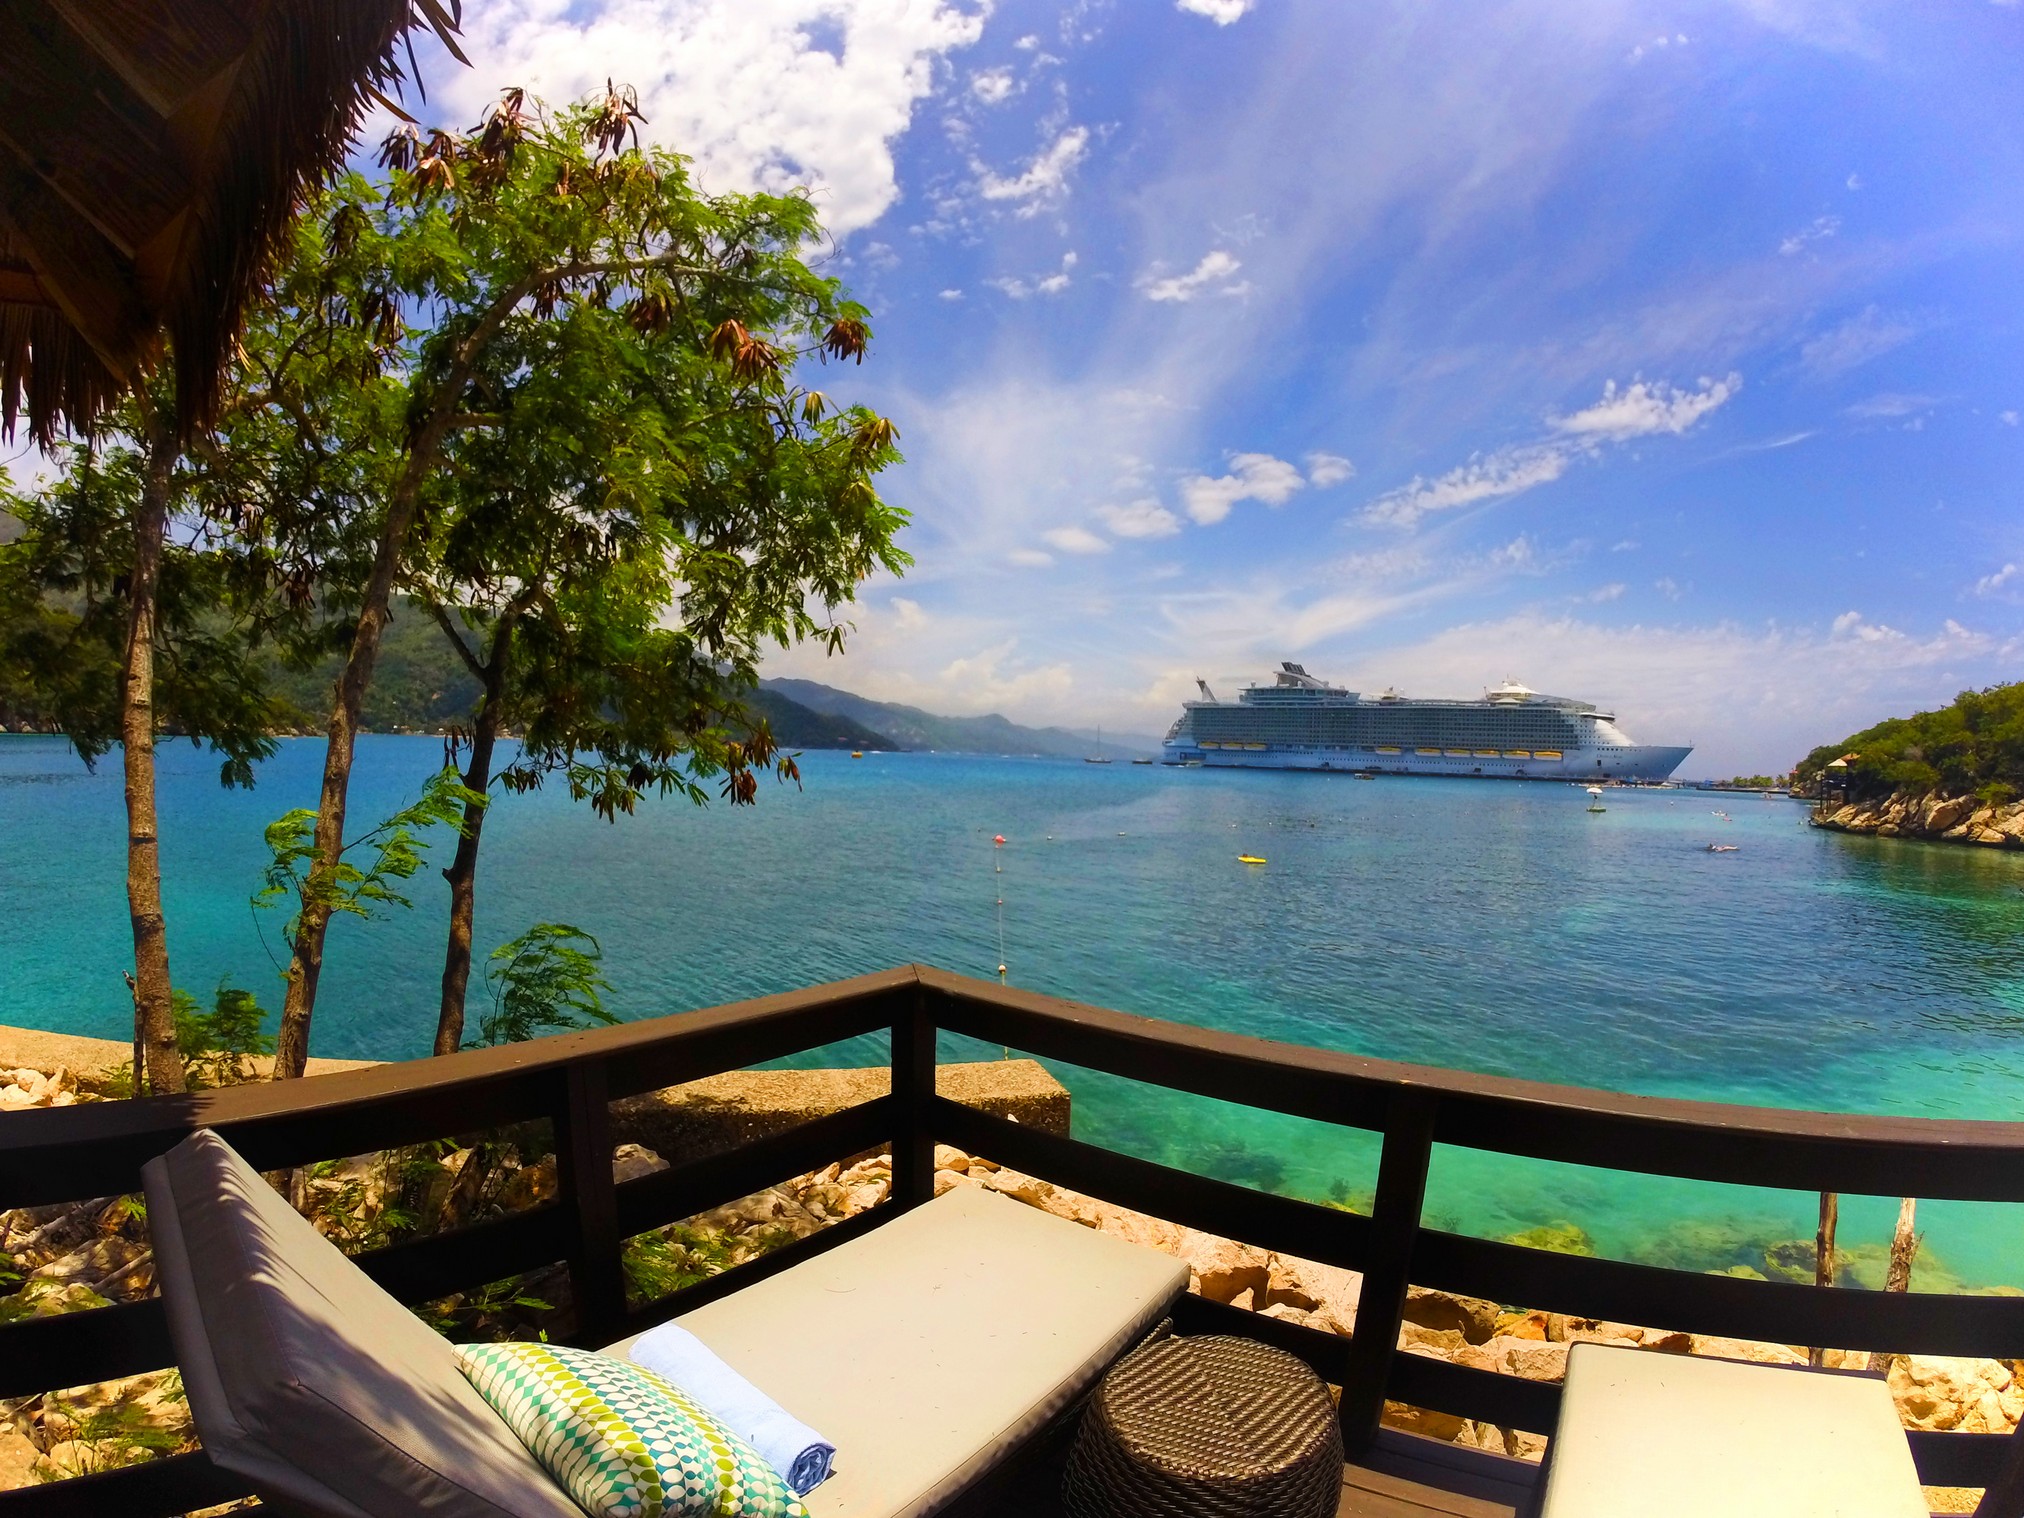 A Day in Labadee, Haiti: Activities and Relaxation at Royal Caribbean’s Private Escape